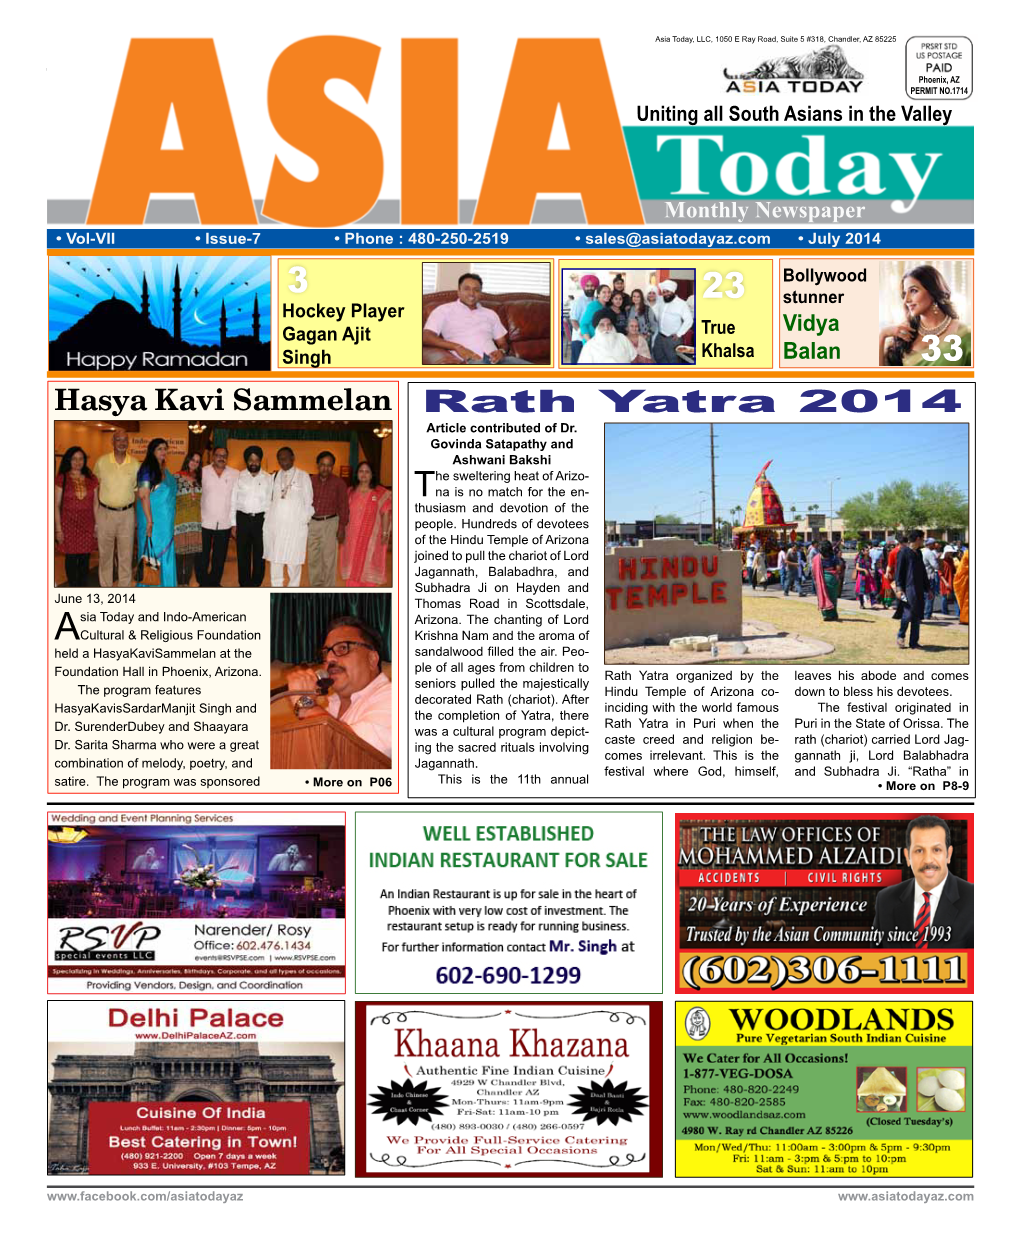 Rath Yatra 2014 Article Contributed of Dr